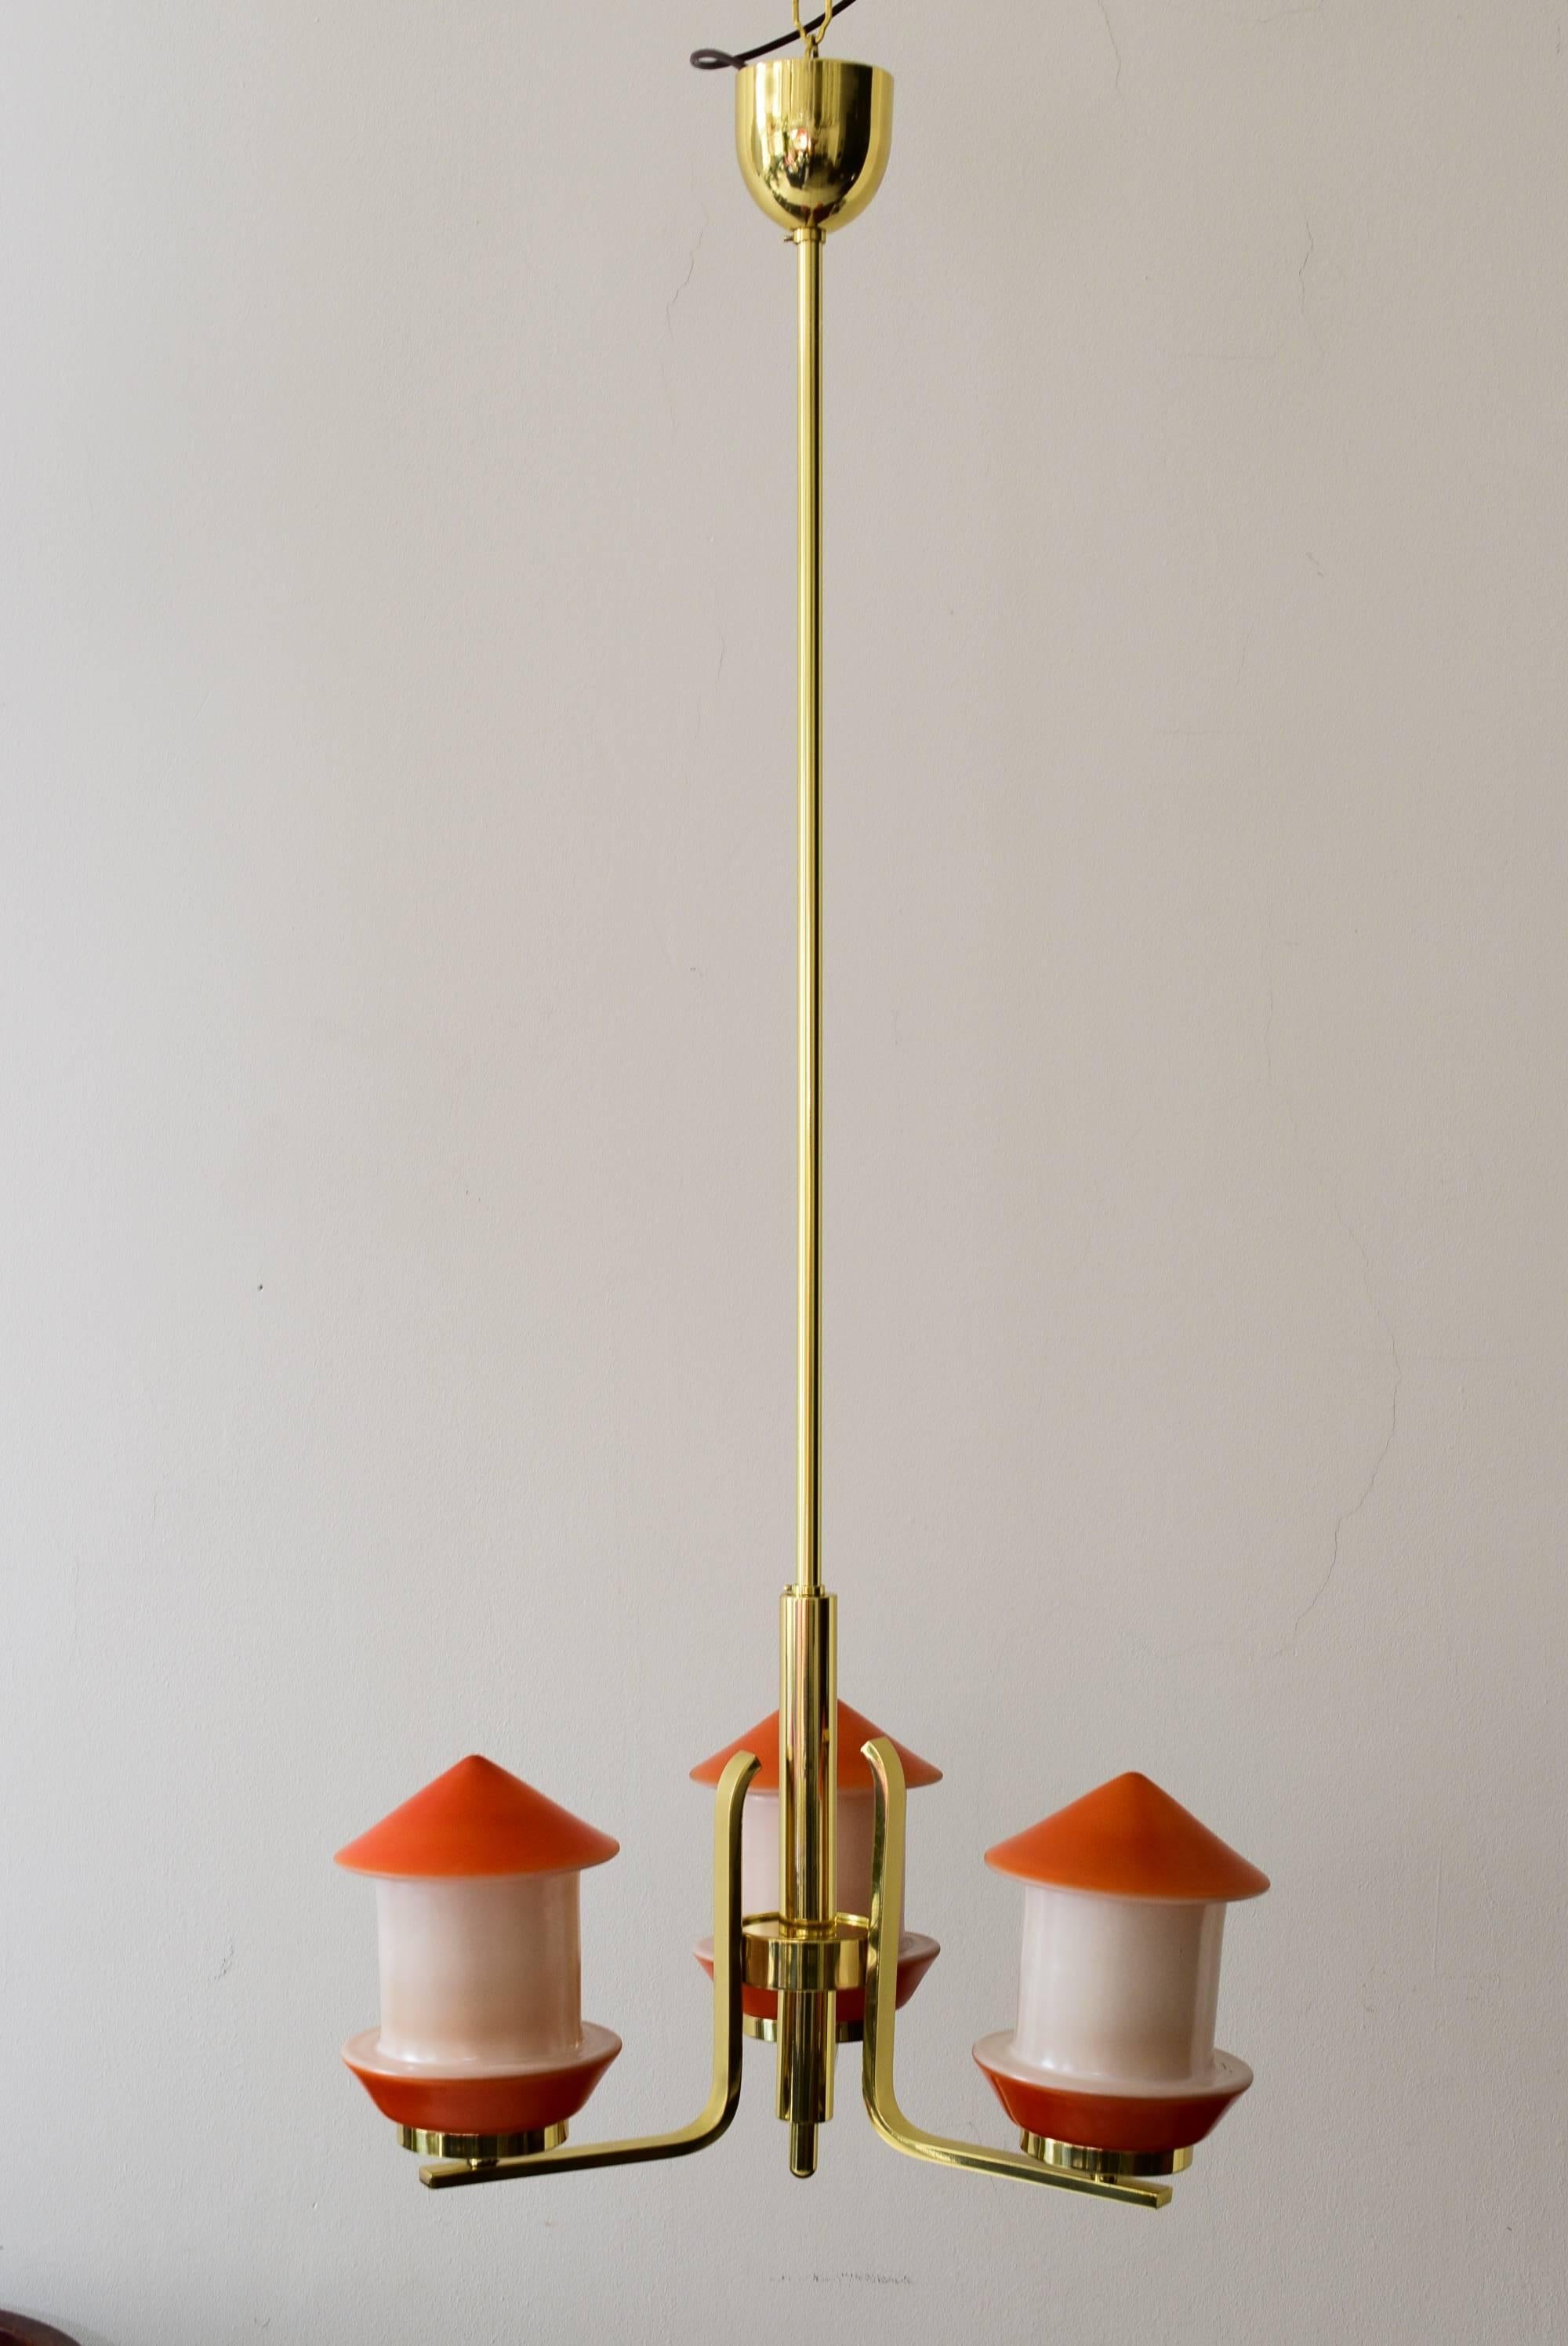 Art Deco chandelier, 1930s.
Polished and stove enamelled.
Original glass.